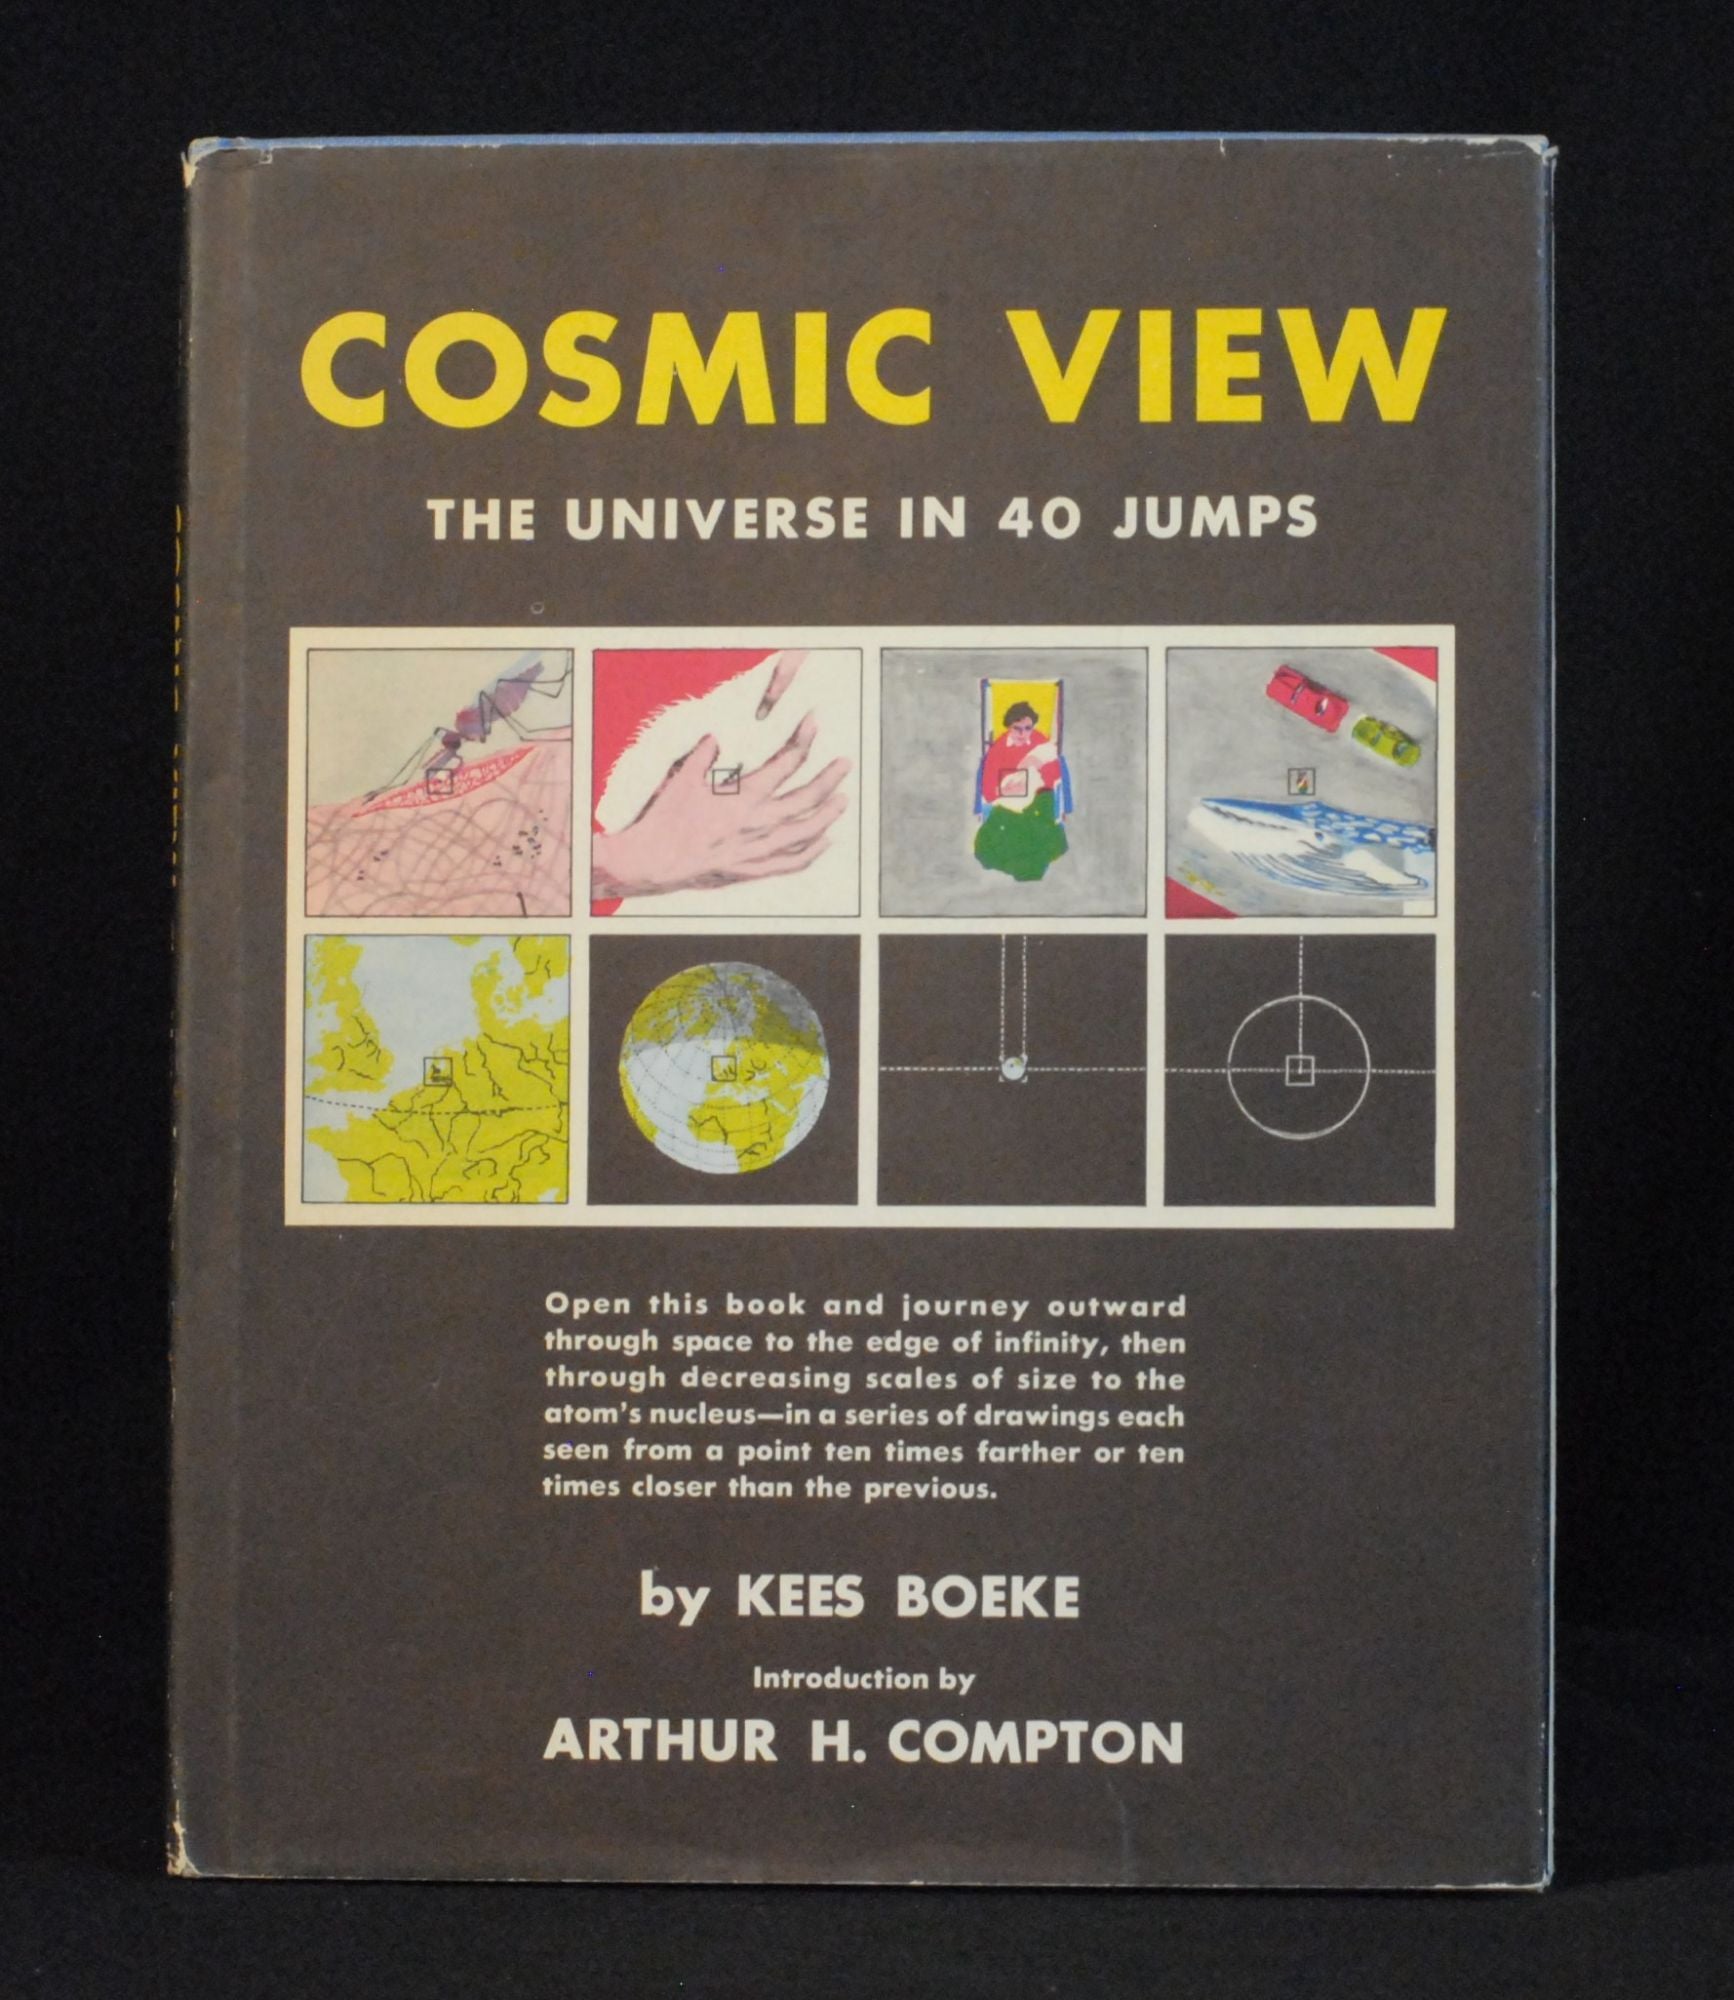 Cosmic View: The Universe in 40 Jumps by Kees Boeke, Arthur H. Compton on B  Street Books, ABAA/ILAB